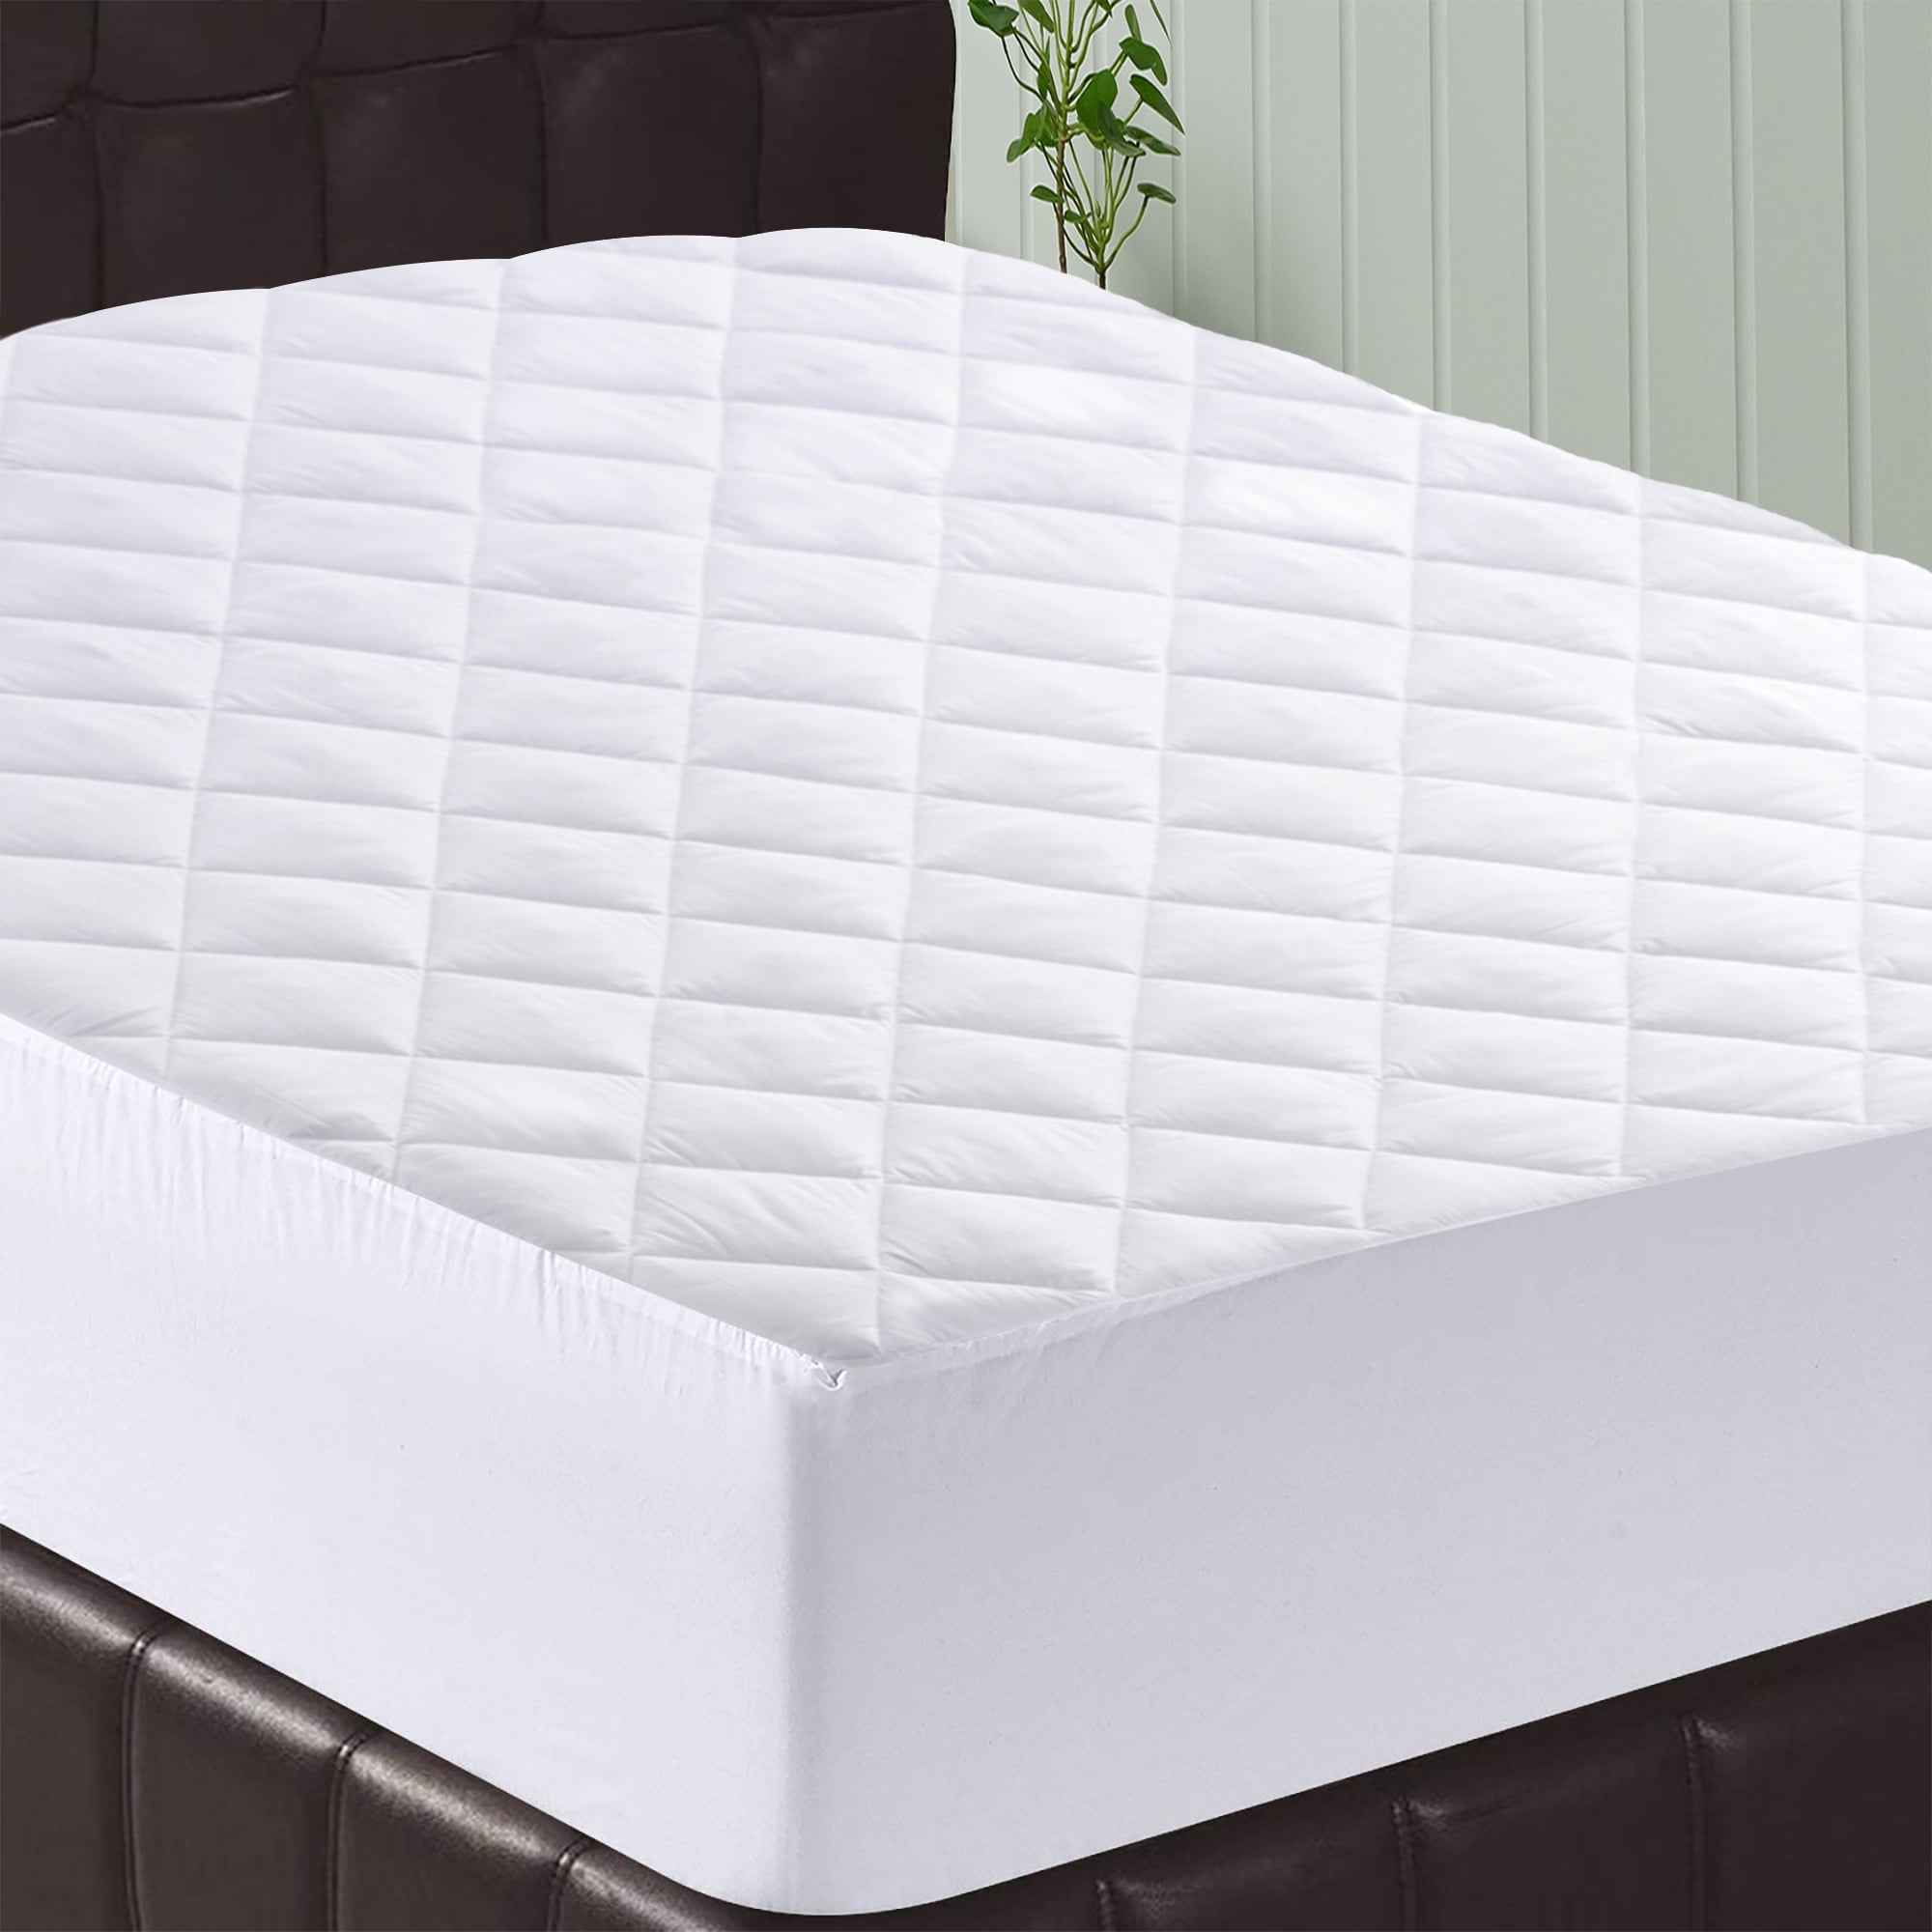 Mattress Pad Cover Cooling Breathable Topper Quilted Fitted Protector Queen Size 